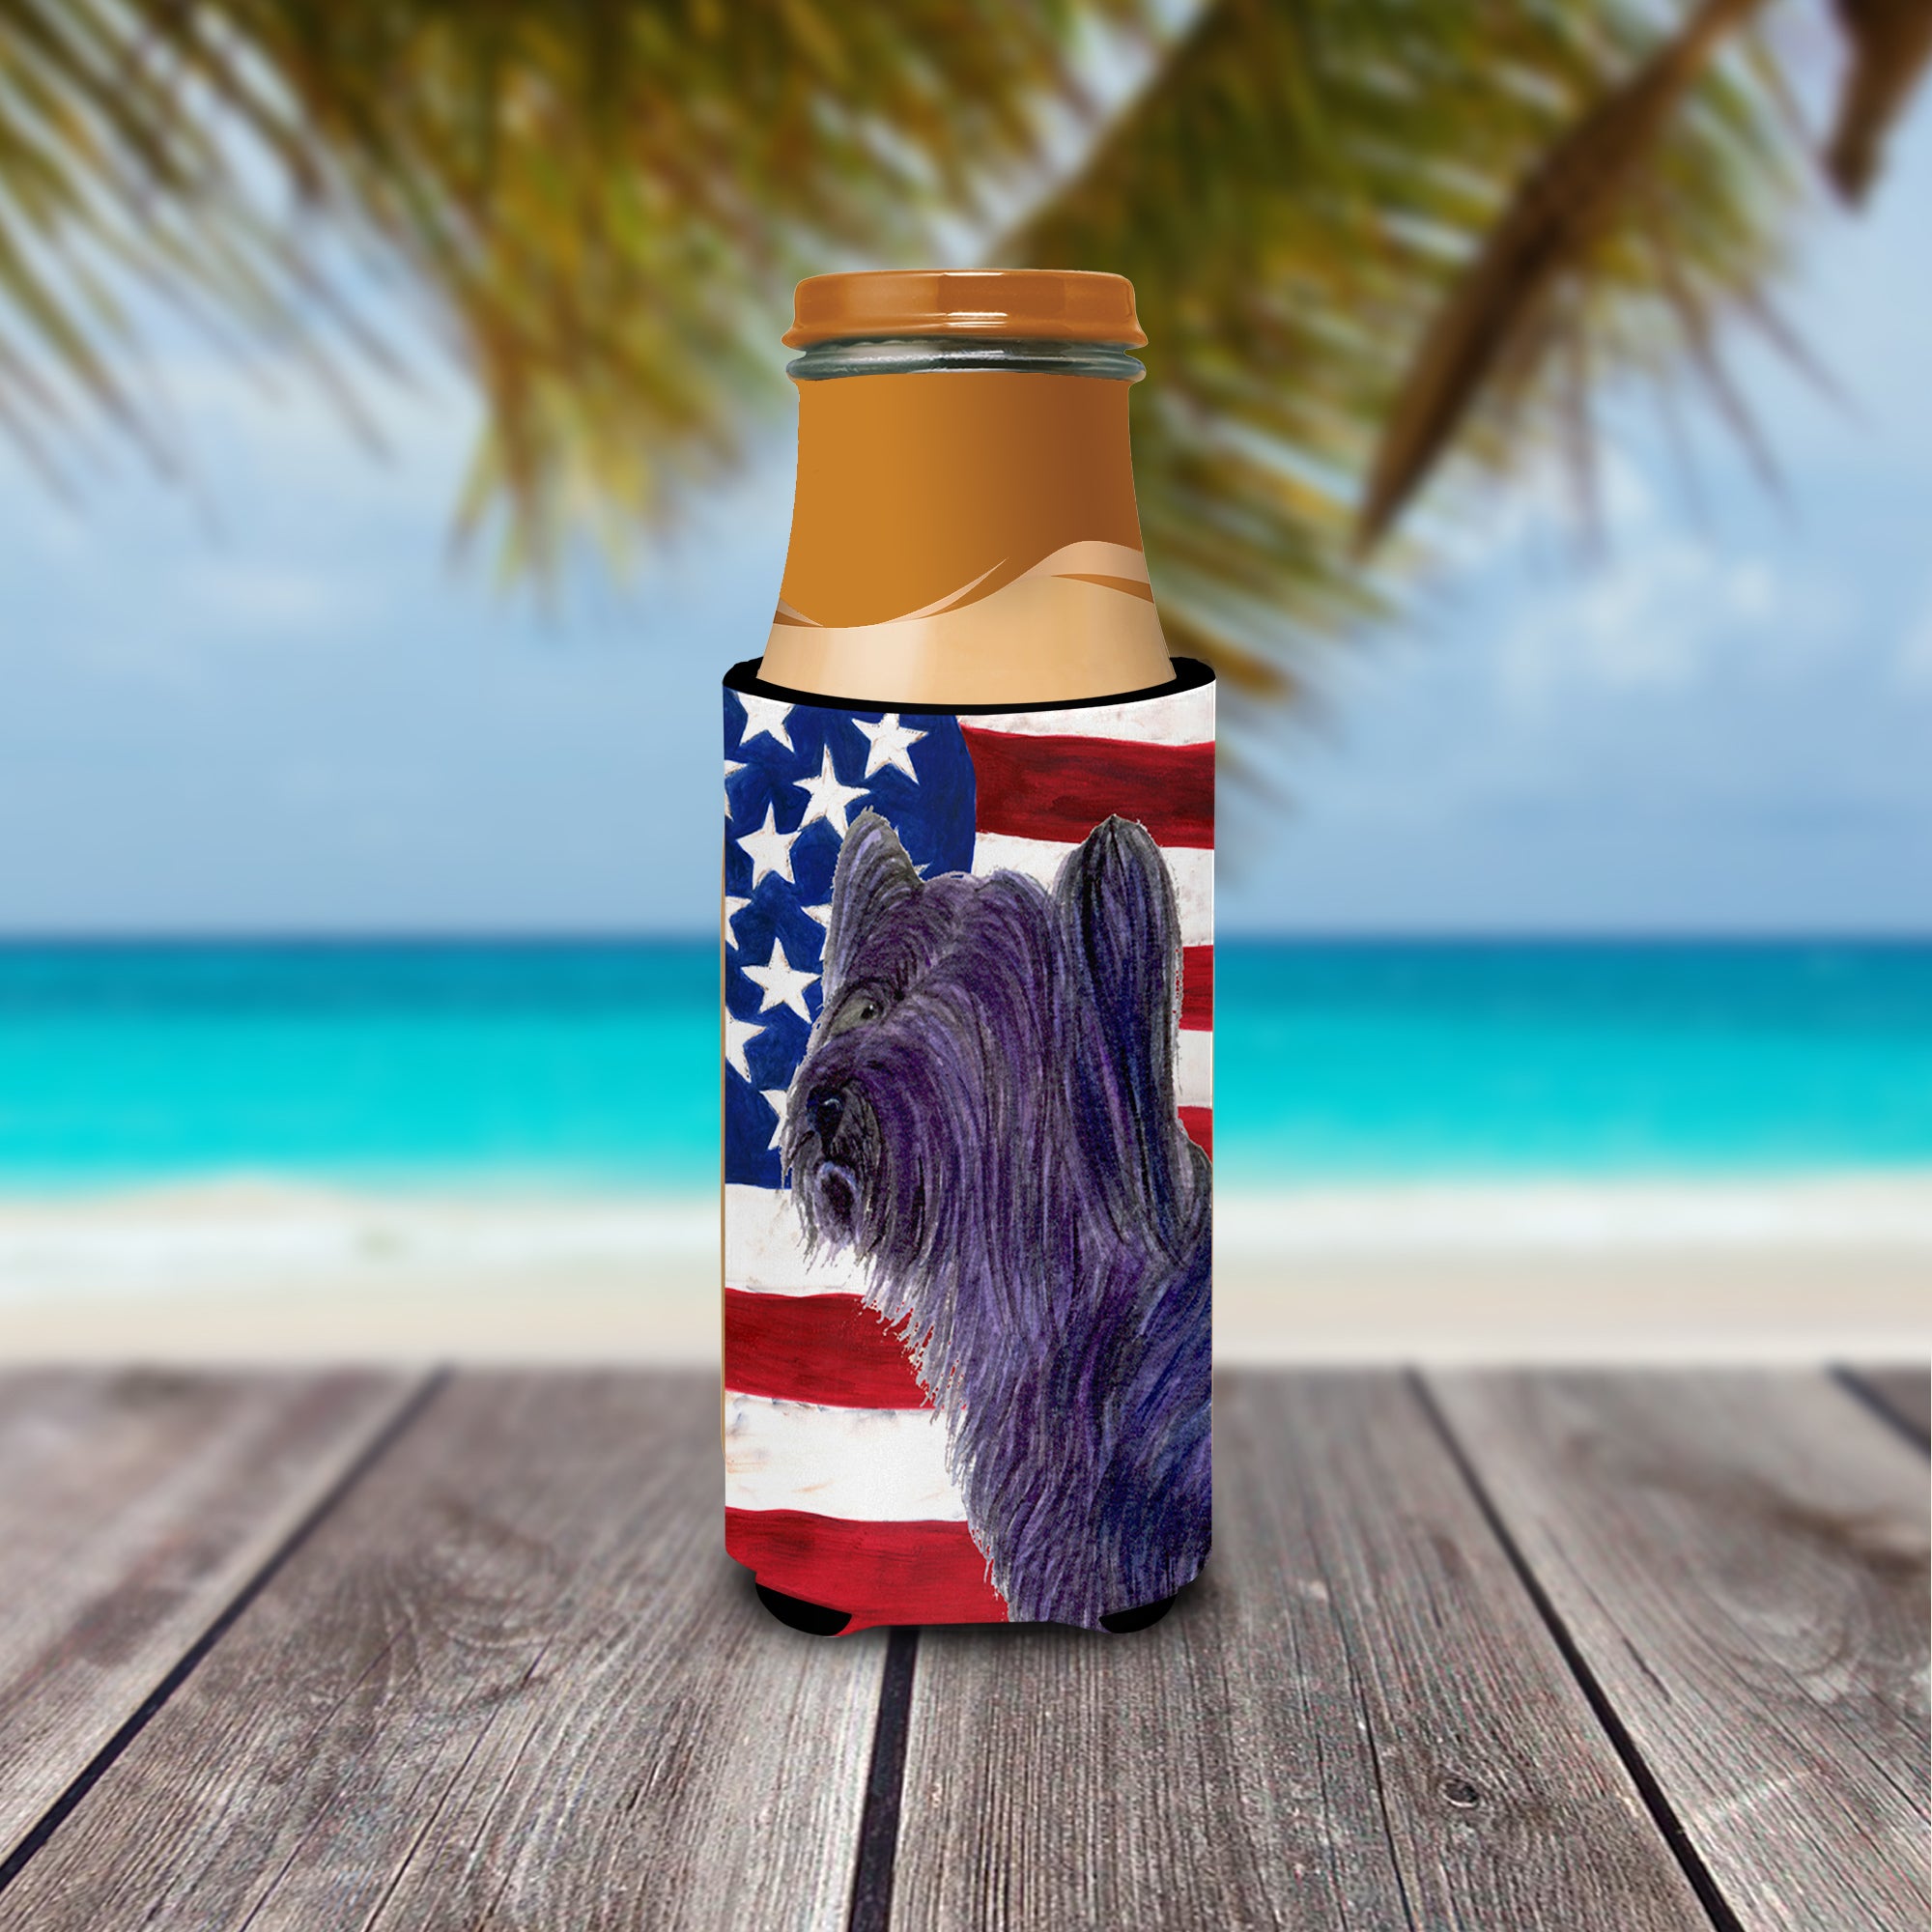 USA American Flag with Skye Terrier Ultra Beverage Insulators for slim cans SS4219MUK